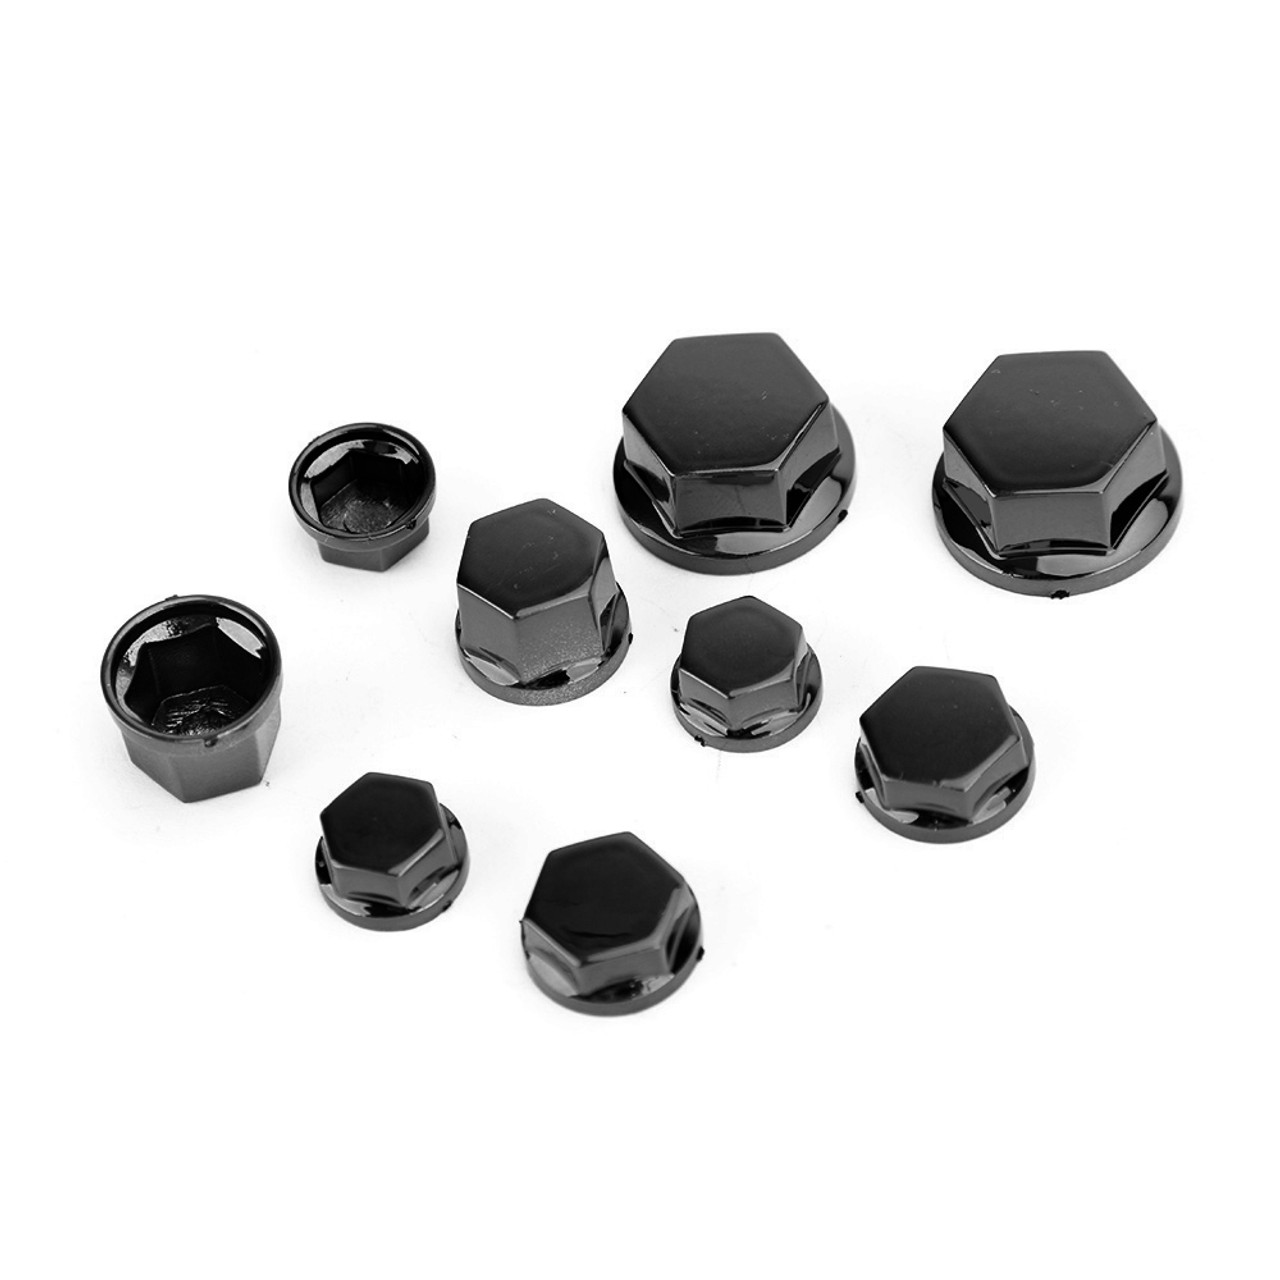 30pcs Motorcycle Hexagon Socket Screw Covers Bolt Nut Caps Fit for Yamaha BLK